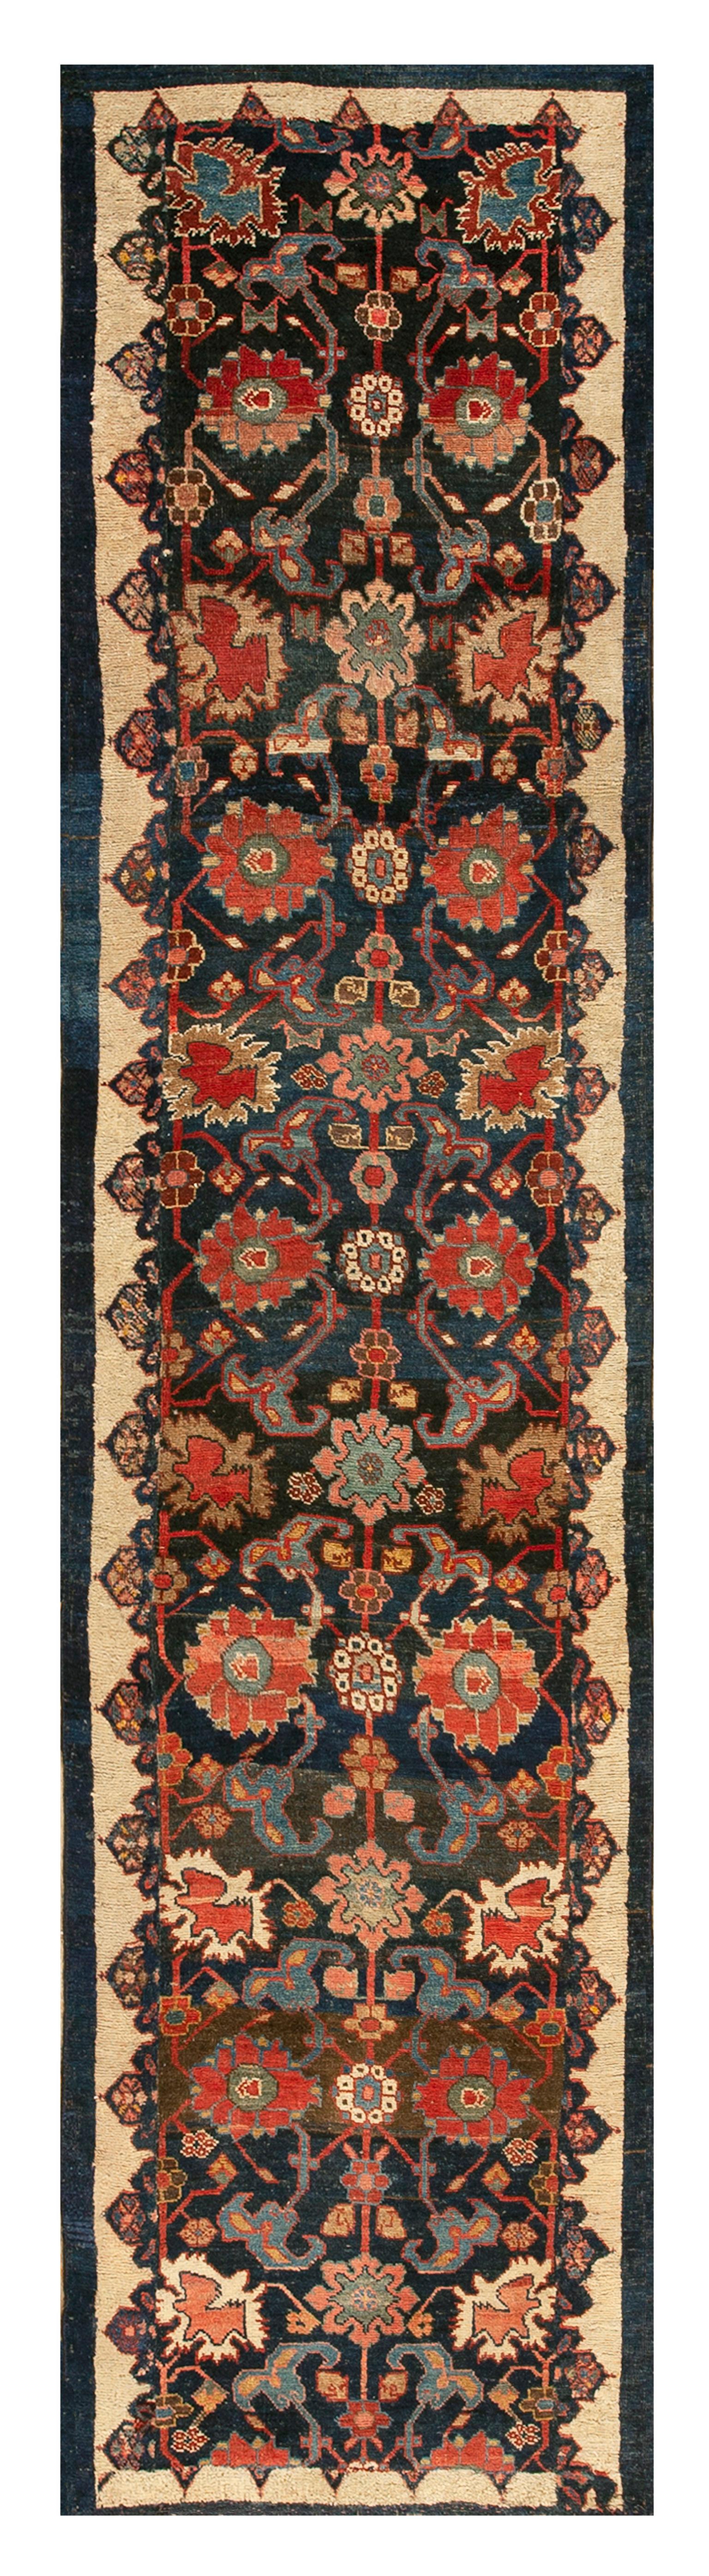 Hand-Knotted 19th Century W. Persian Bijar Carpet ( 2'4'' x 9'9'' - 71 x 297 ) For Sale